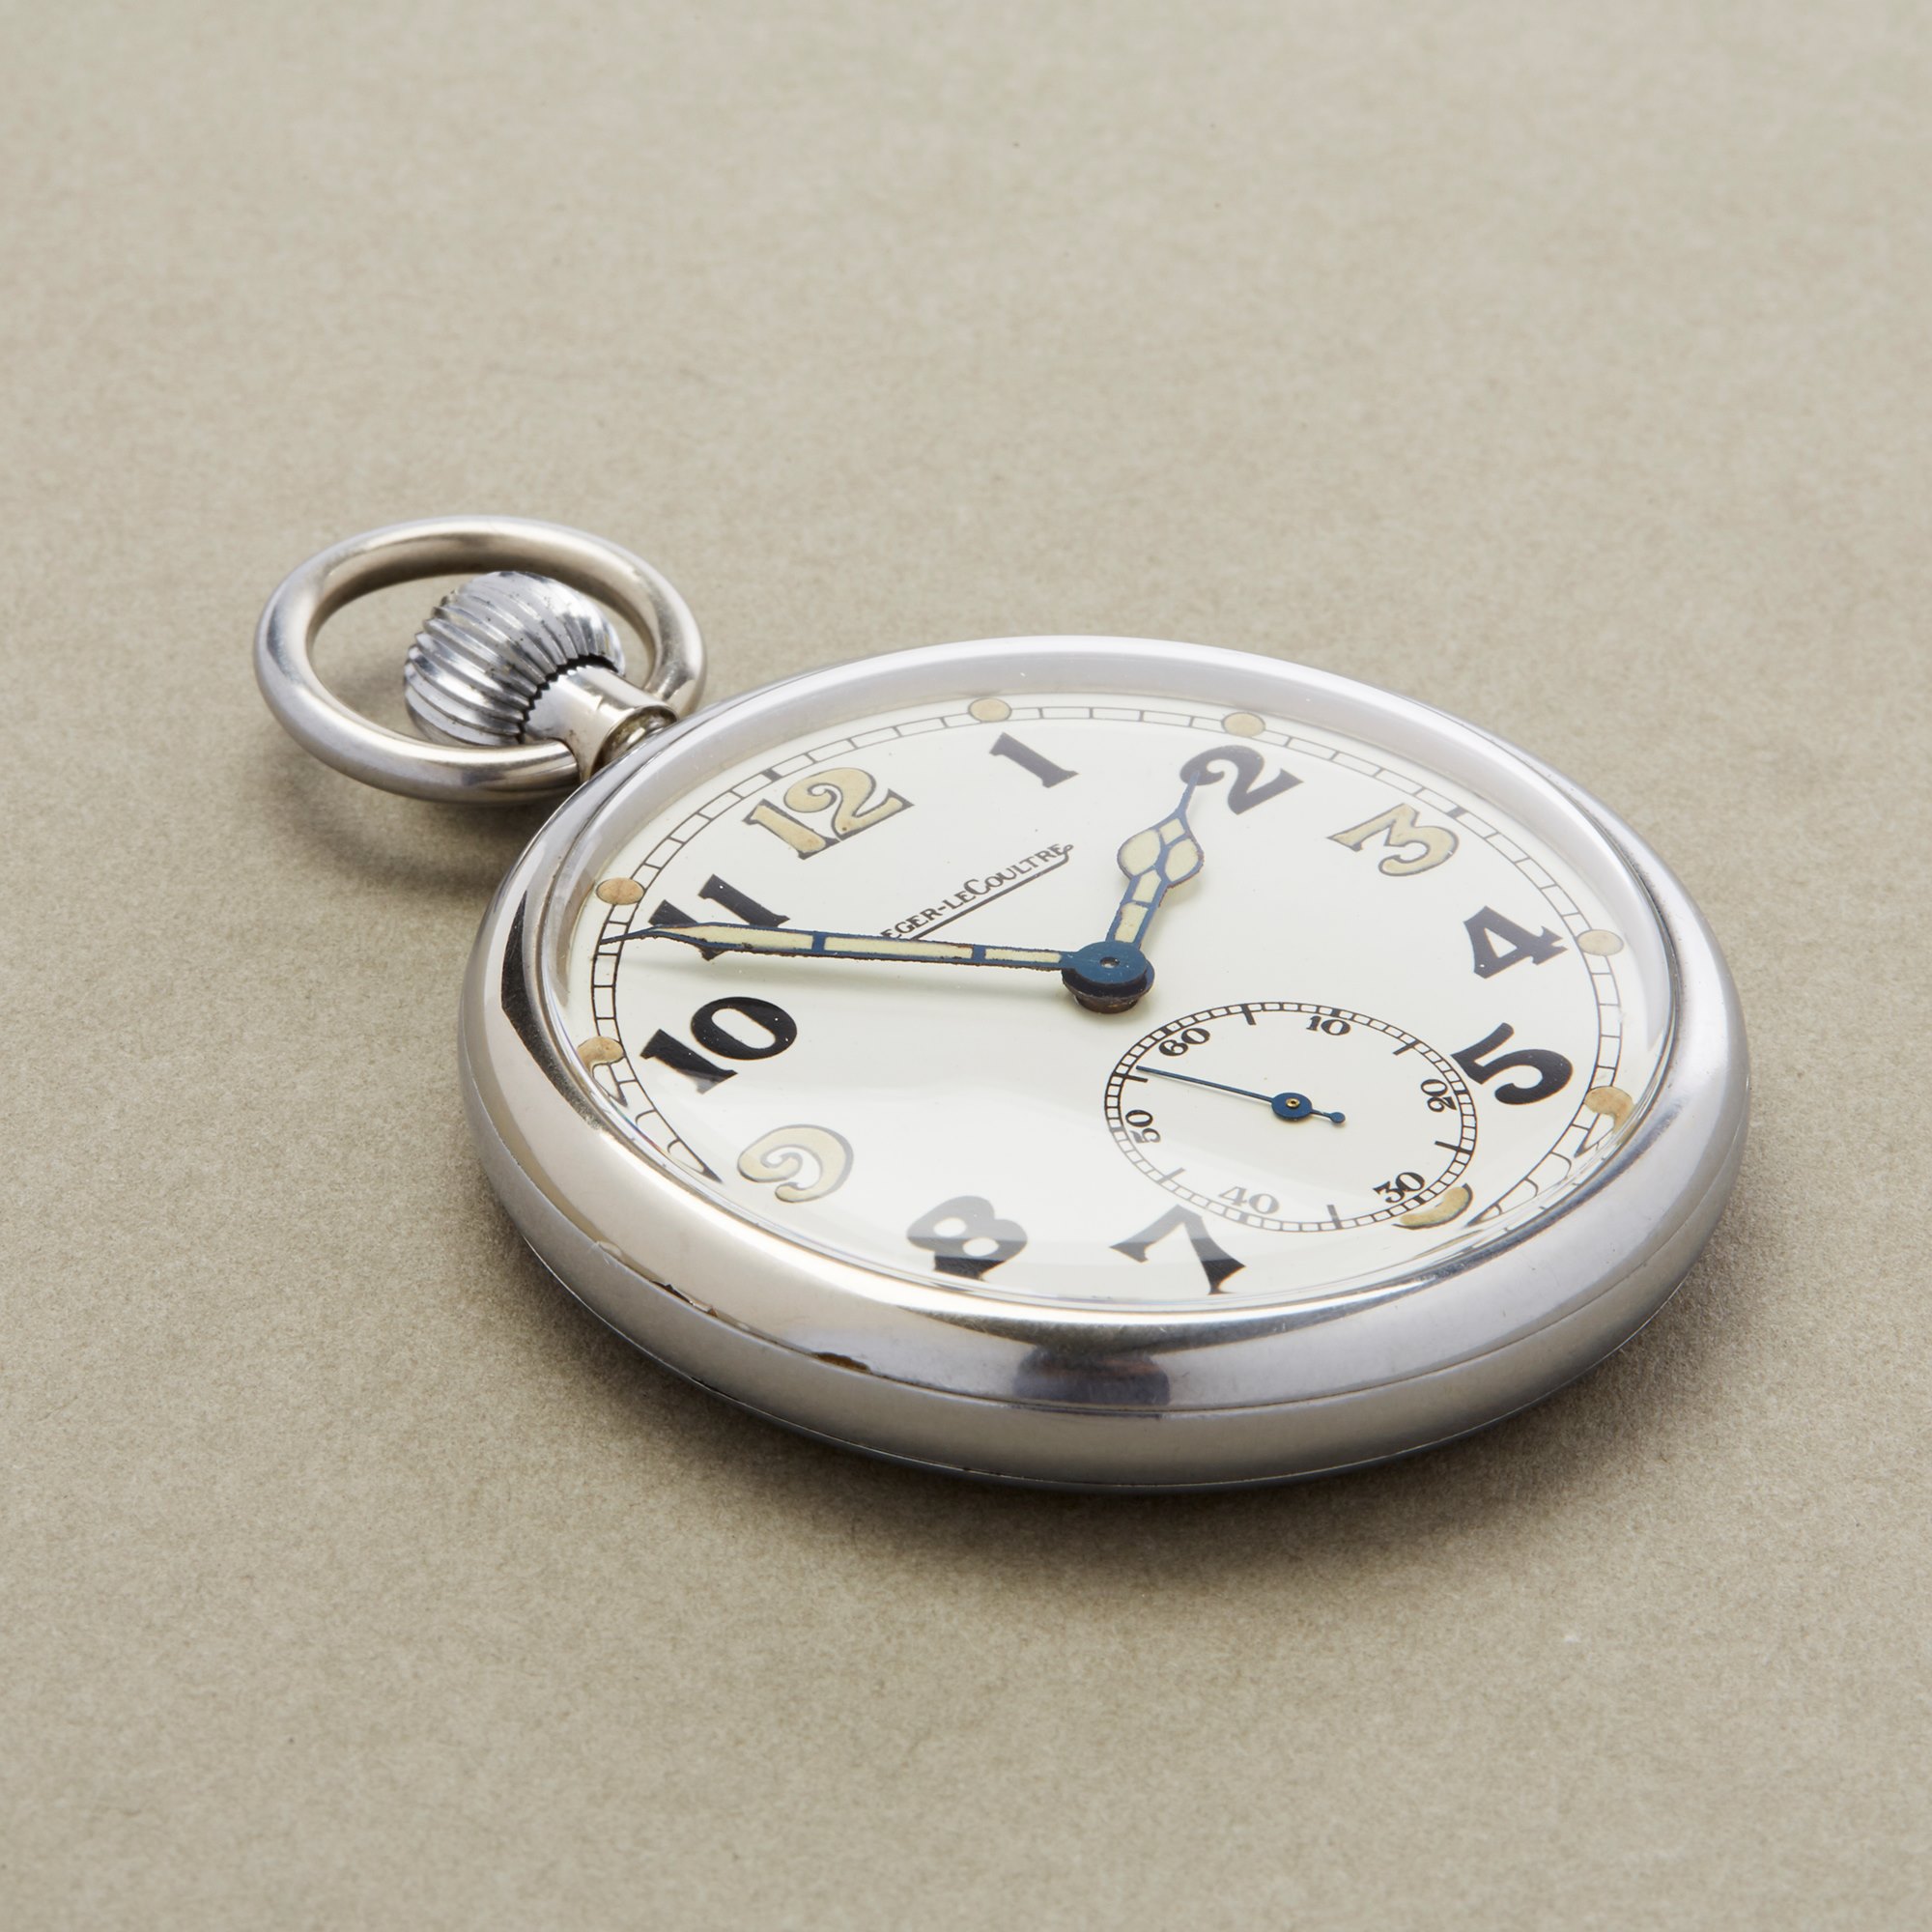 Jaeger-LeCoultre Pocket Watch G.S.T.P Military pocket watch Stainless Steel 467/2